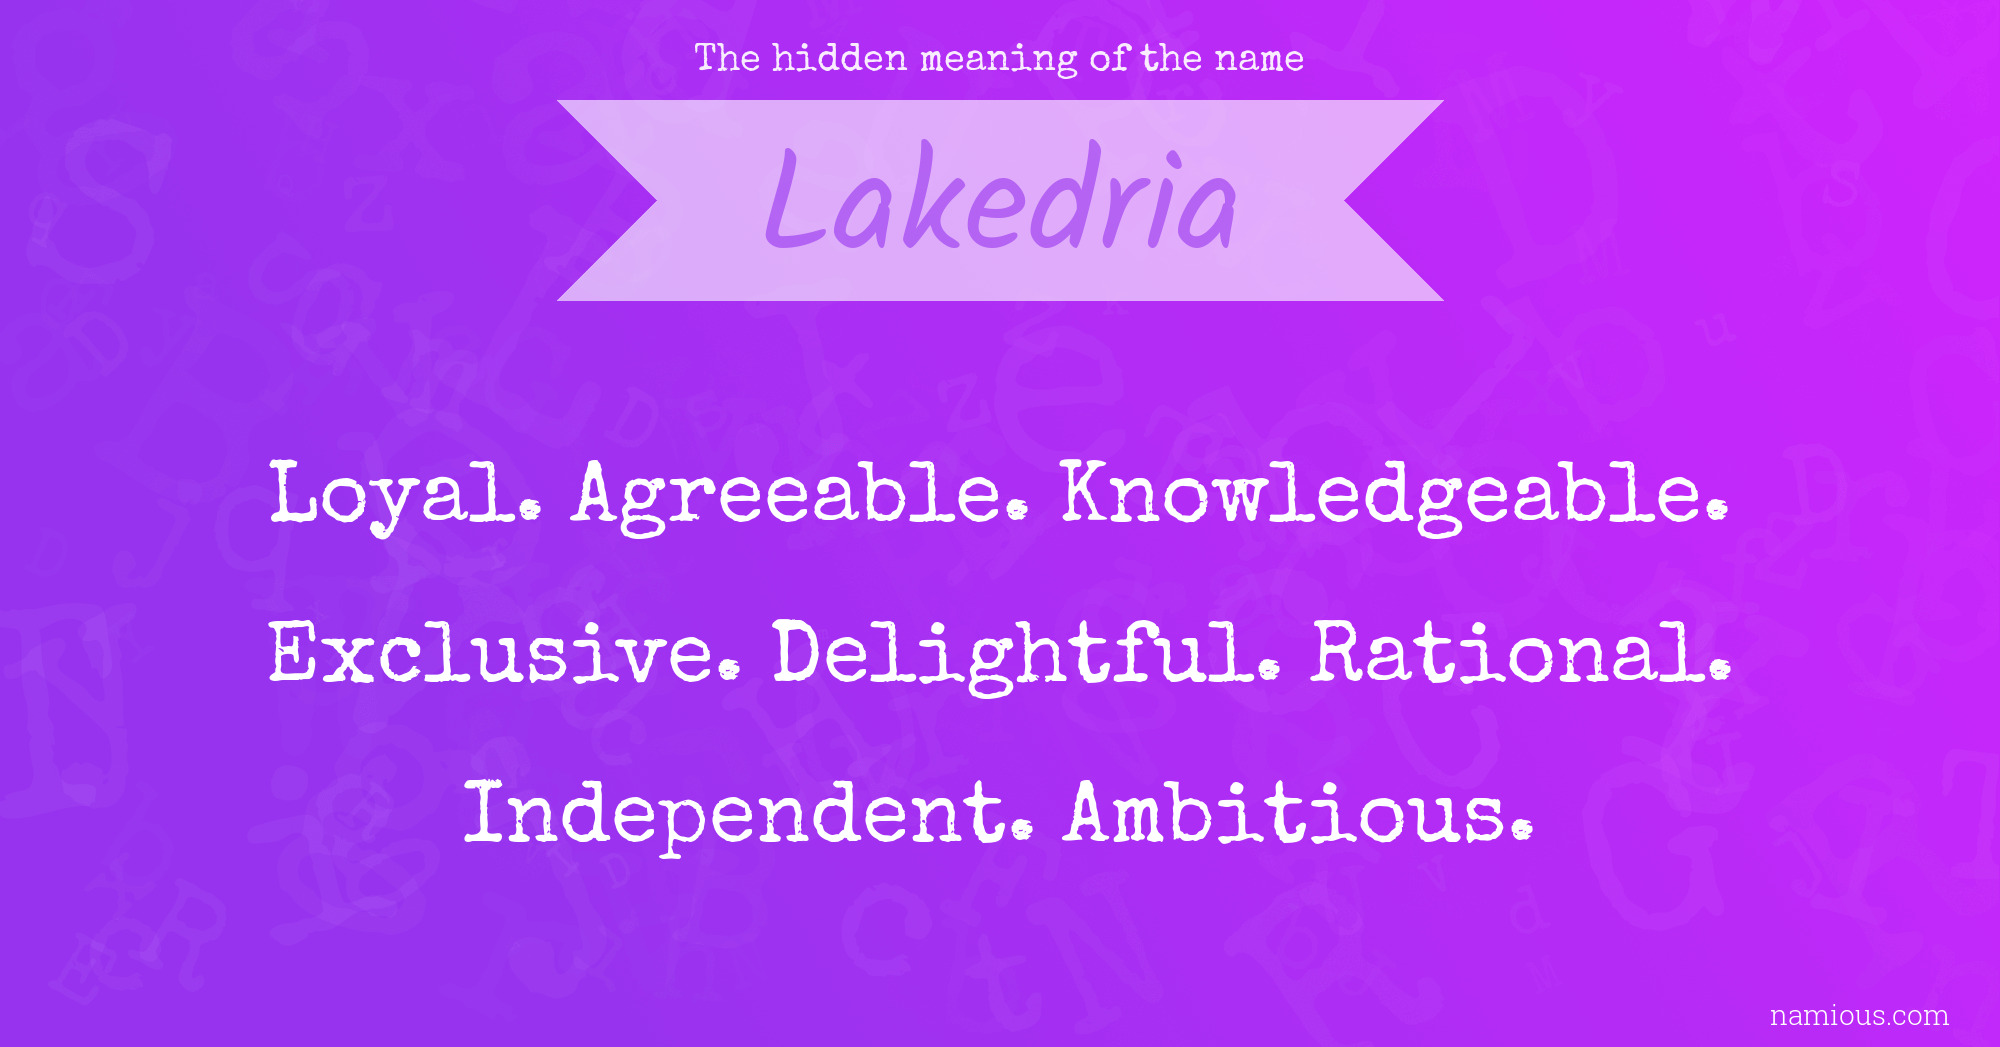 The hidden meaning of the name Lakedria